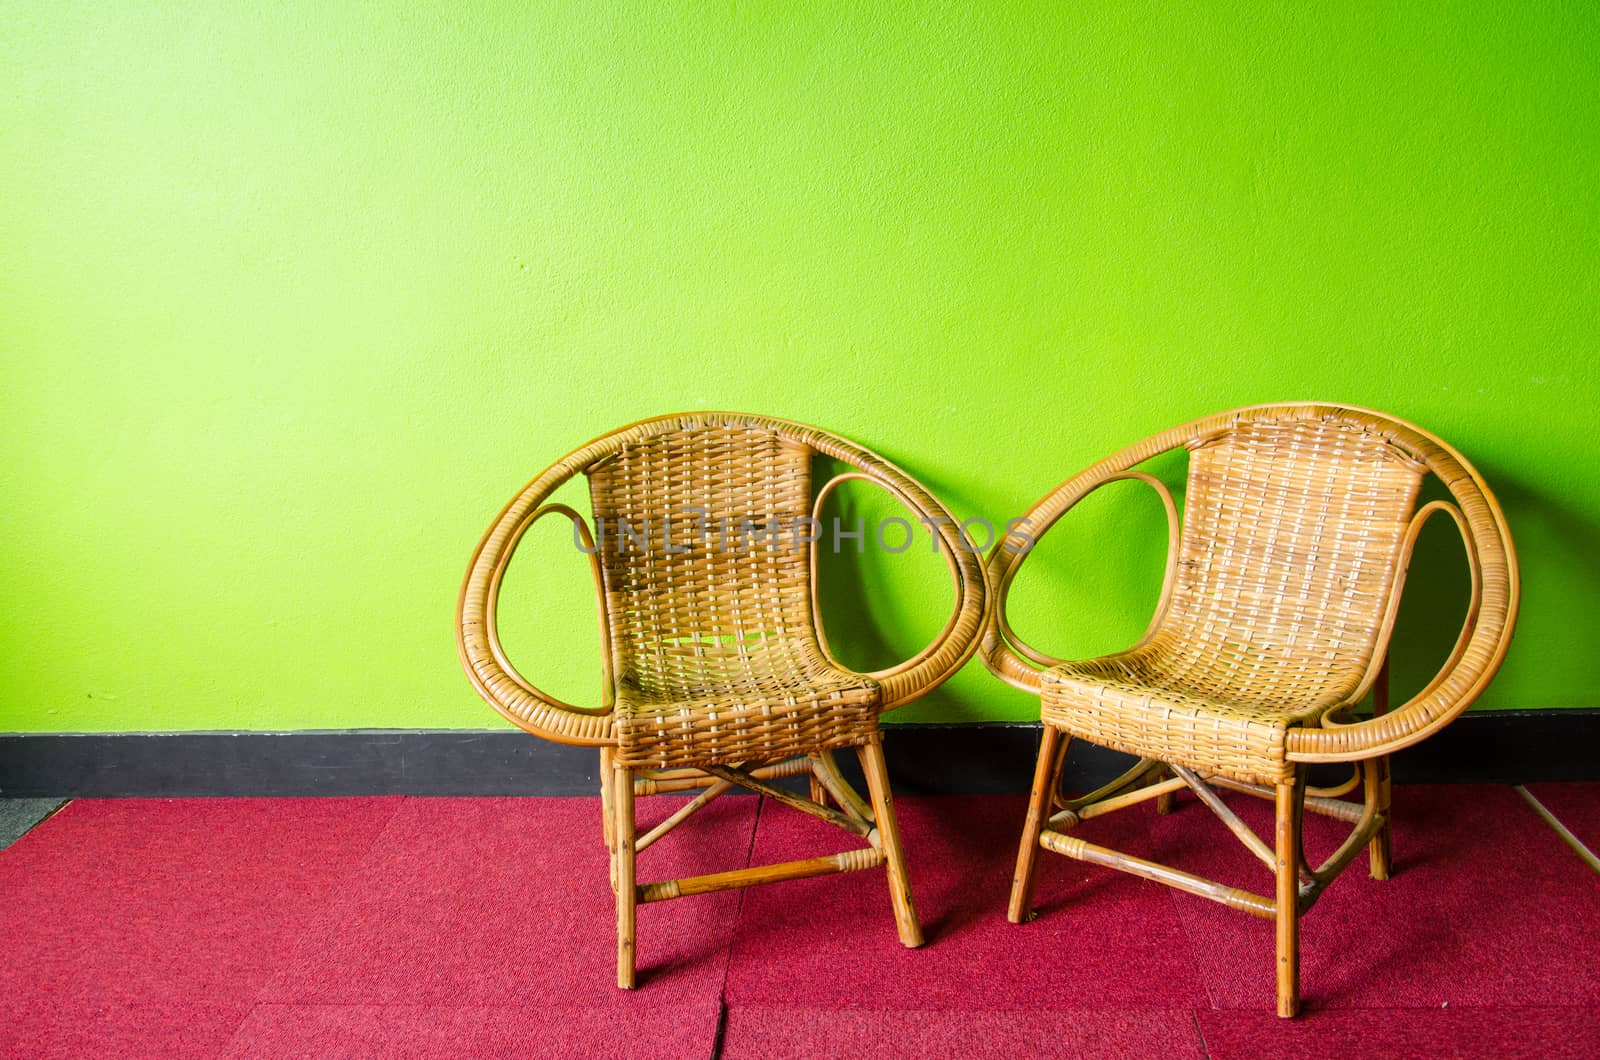 Two Chairs in the Green Room